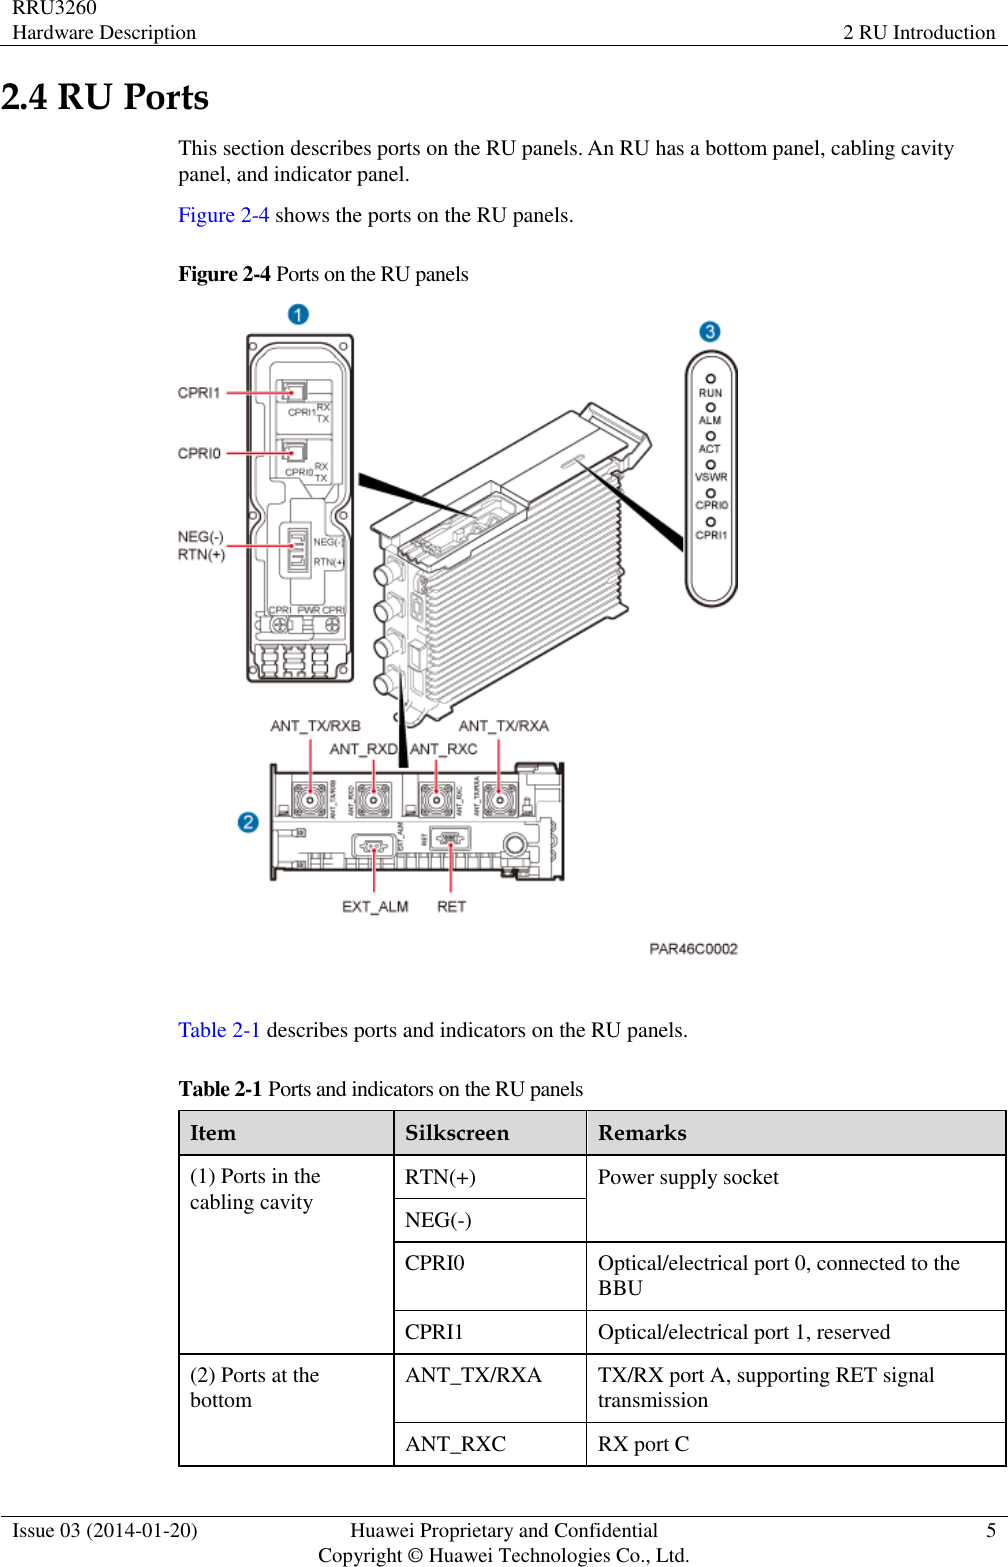 RRU3260 Hardware Description 2 RU Introduction  Issue 03 (2014-01-20) Huawei Proprietary and Confidential                                     Copyright © Huawei Technologies Co., Ltd. 5  2.4 RU Ports This section describes ports on the RU panels. An RU has a bottom panel, cabling cavity panel, and indicator panel. Figure 2-4 shows the ports on the RU panels. Figure 2-4 Ports on the RU panels   Table 2-1 describes ports and indicators on the RU panels. Table 2-1 Ports and indicators on the RU panels Item Silkscreen Remarks (1) Ports in the cabling cavity RTN(+) Power supply socket NEG(-) CPRI0 Optical/electrical port 0, connected to the BBU CPRI1 Optical/electrical port 1, reserved (2) Ports at the bottom ANT_TX/RXA TX/RX port A, supporting RET signal transmission ANT_RXC RX port C 